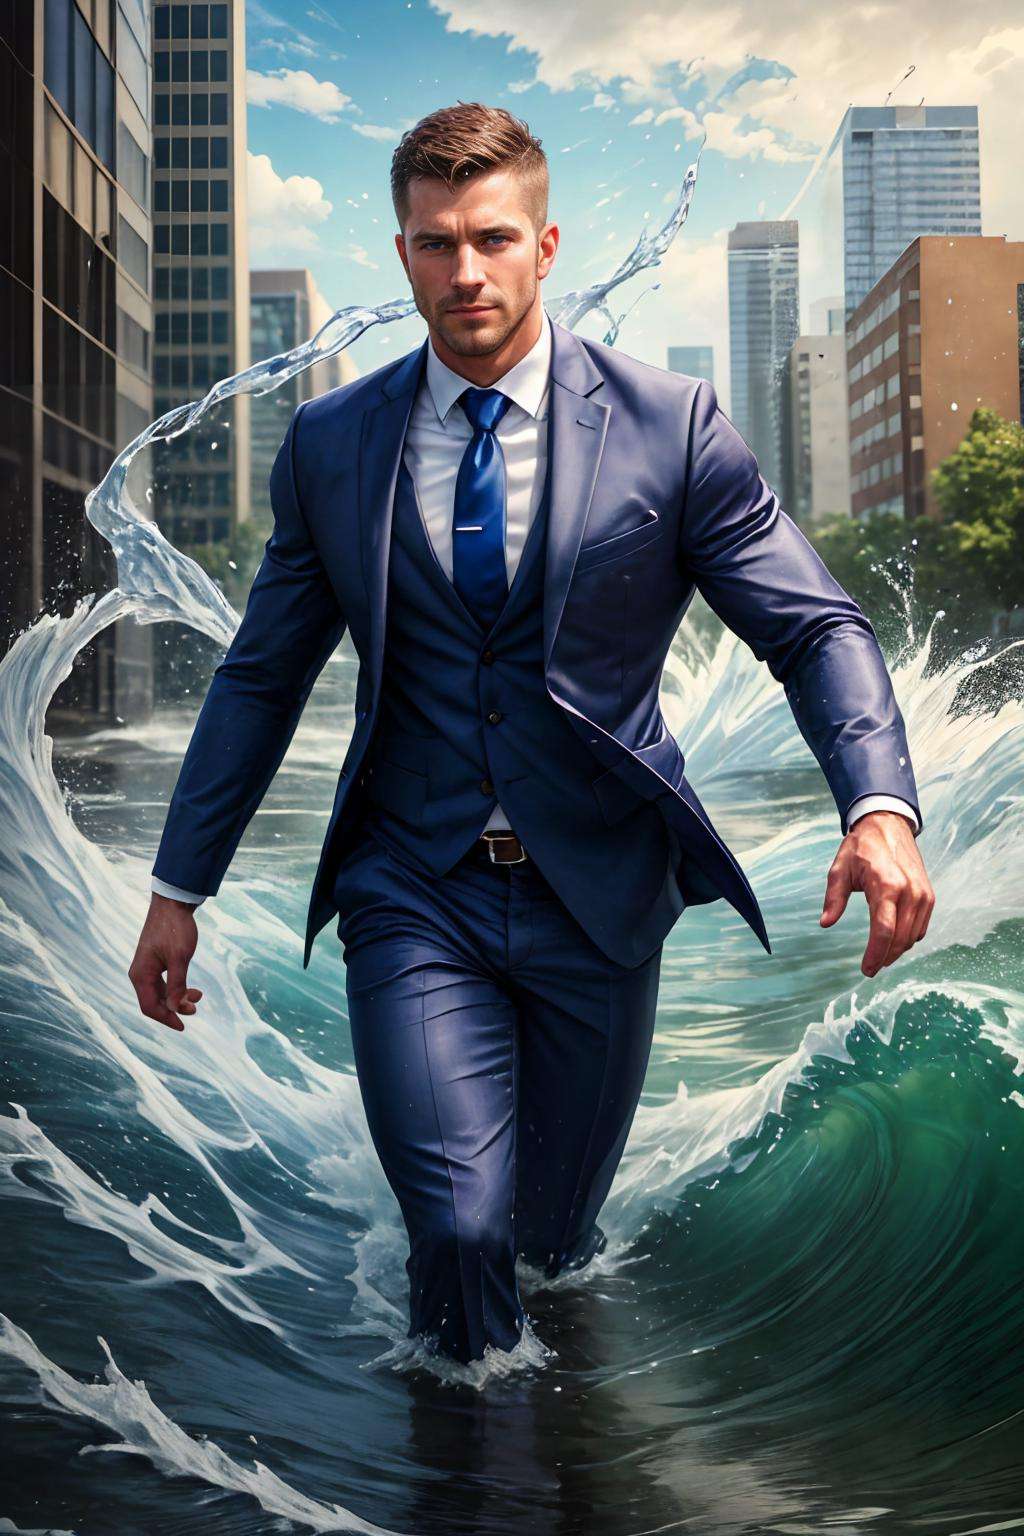 realistic, masterpiece, best quality, natural lighting, soft shadow, insane detail, detailed background, professional photography, depth of field, intricate, detailed face, subsurface scattering, realistic hair, realistic eyes, muscular, masculine, photo of a handsome man, hydr0mancer, water, splashing, hydrokinesis, business suit, necktie, city, street, (40 year old), casting water magic, swirling water,